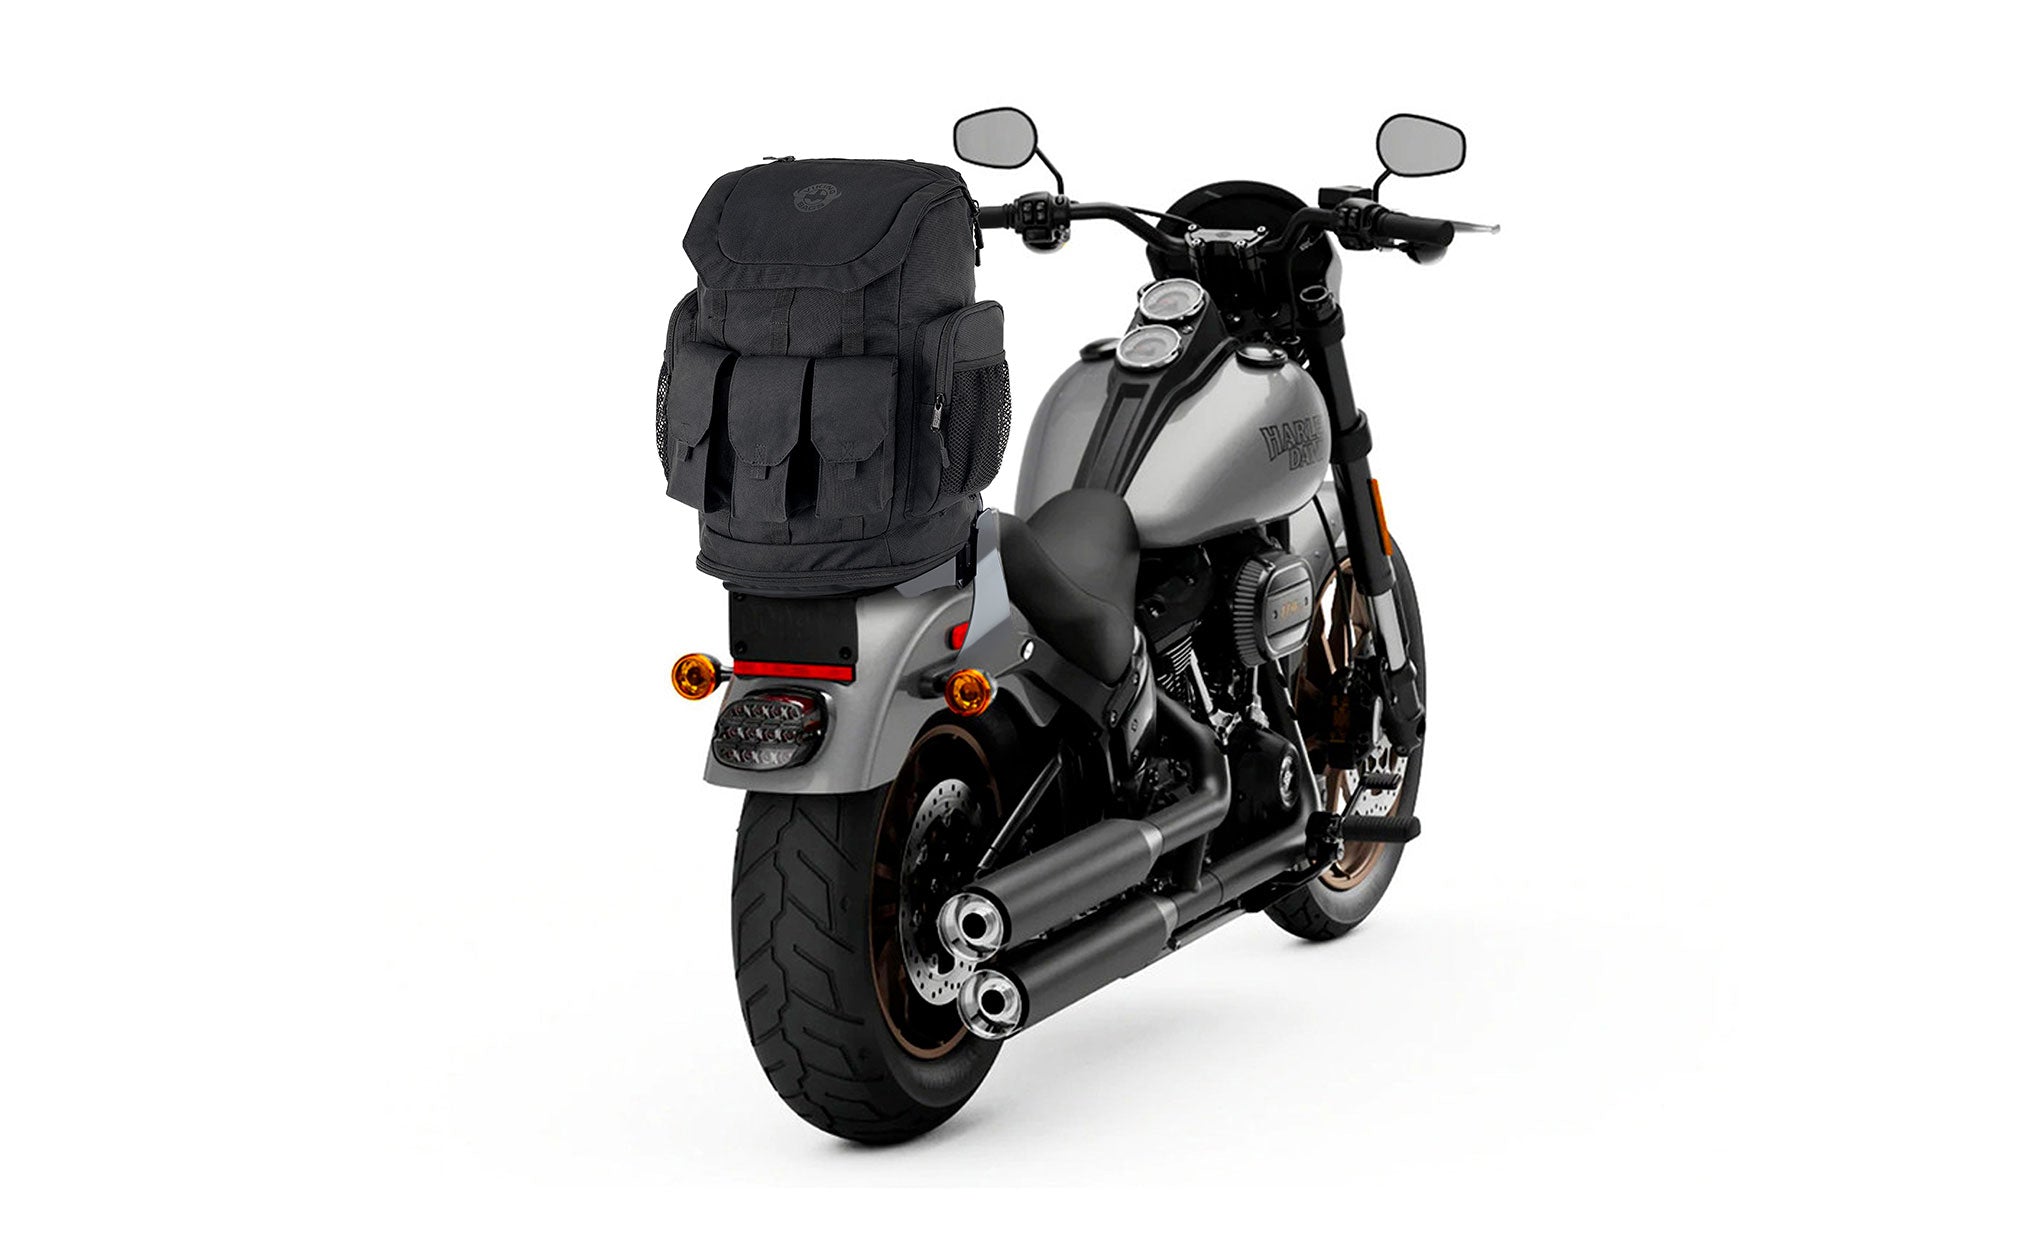 Viking Trident XL Motorcycle Backpack Bag on Bike View @expand